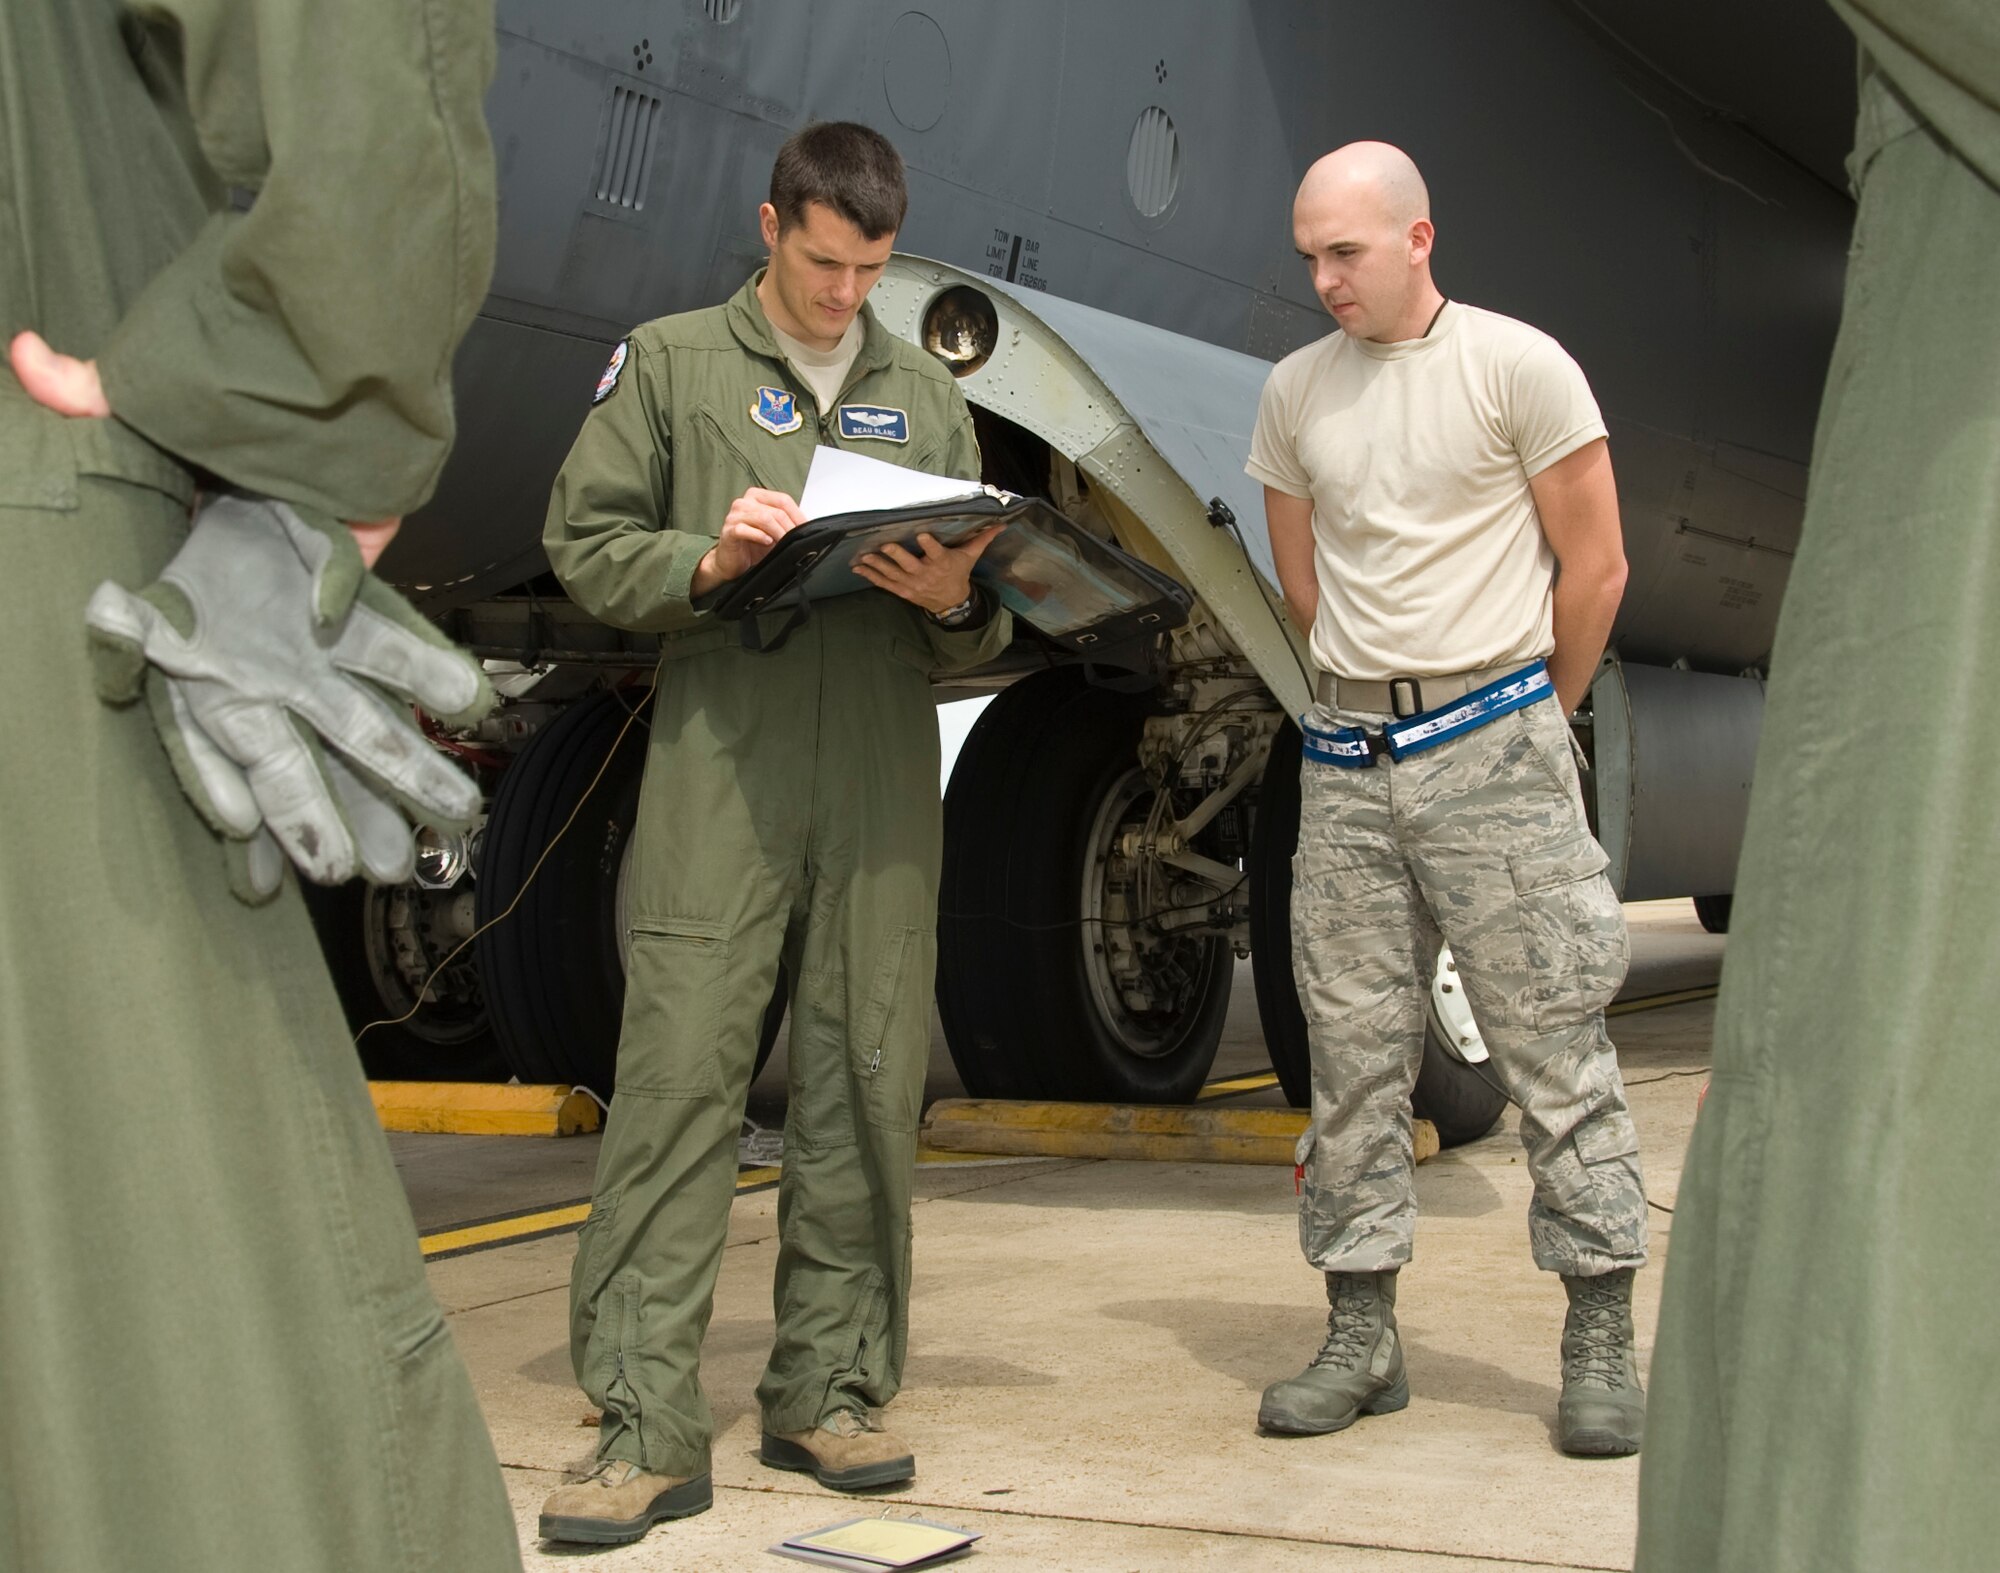 Capt. Joseph Blanc, 20th Bomb Squadron, looks over maintenance forms on Barksdale Air Force Base, La., March 13. The crew chiefs fill out forms that highlight discrepancies and maintenance on the aircraft. The aircrew goes over the forms so they know the condition of the aircraft. (U.S. Air Force photo/Airman 1st Class Benjamin Gonsier)(RELEASED)
